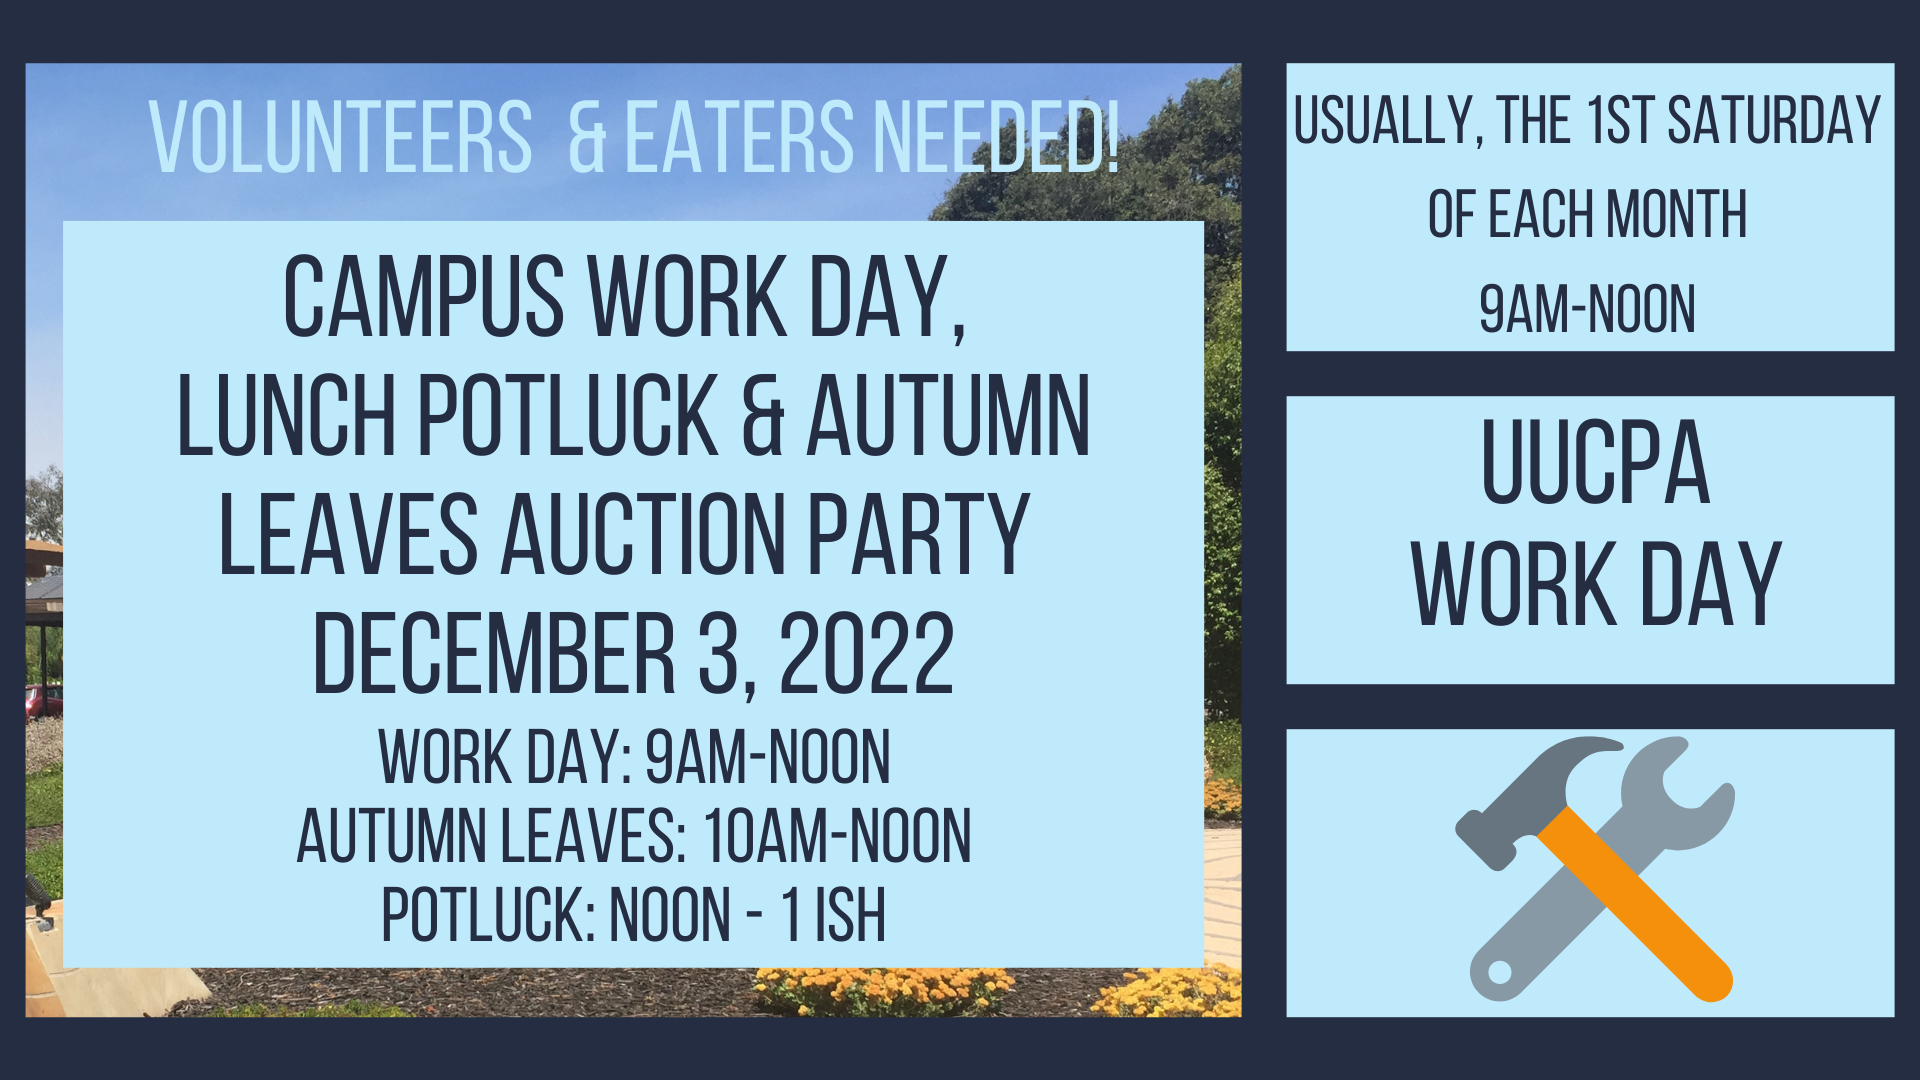 Campus Workday, Autumn Leaves Auction Party & Potluck